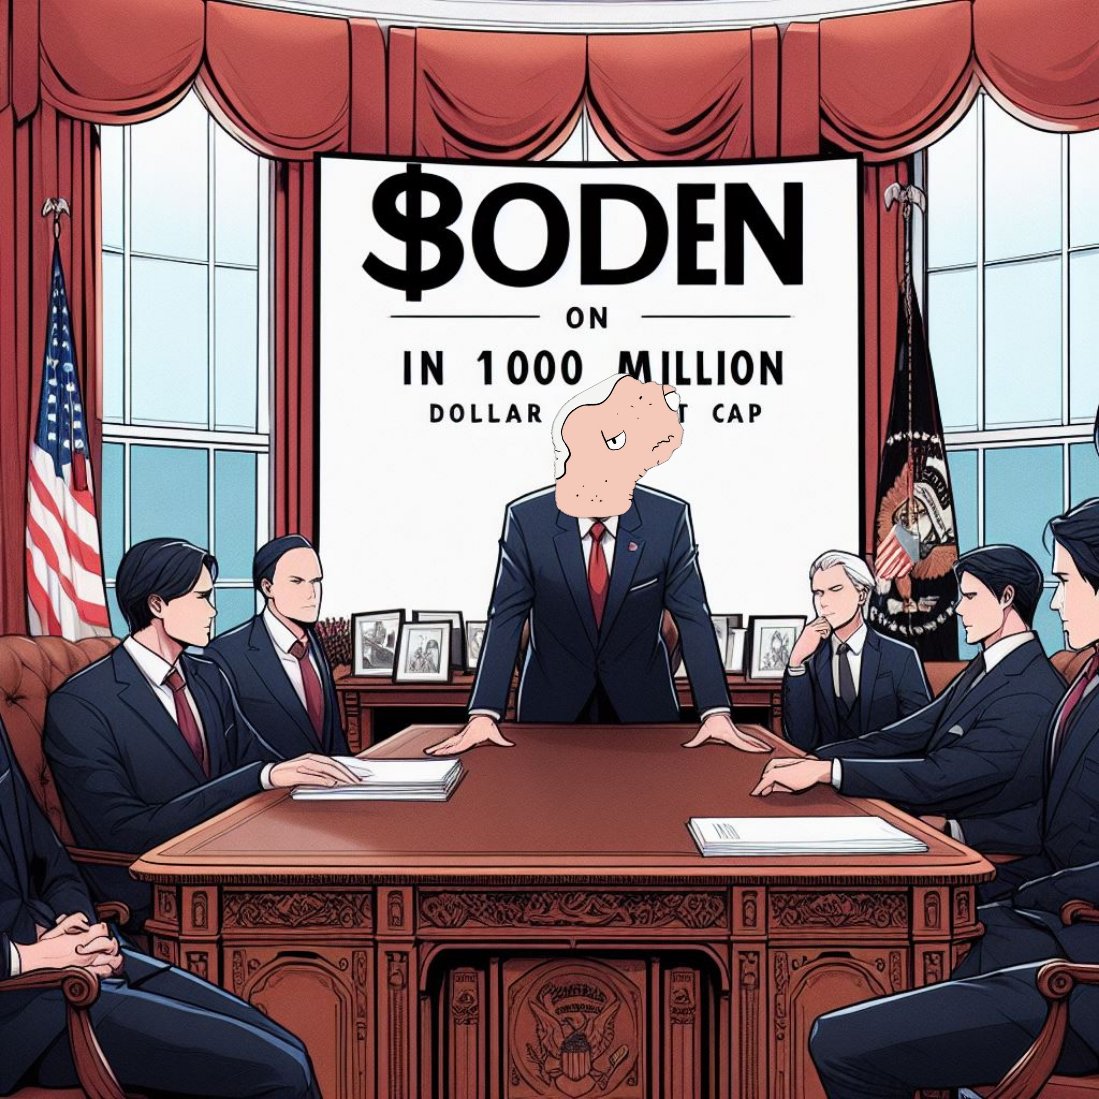 What's the mission president!! $Boden to $100,000,000 #BasedBoden #AIBoden